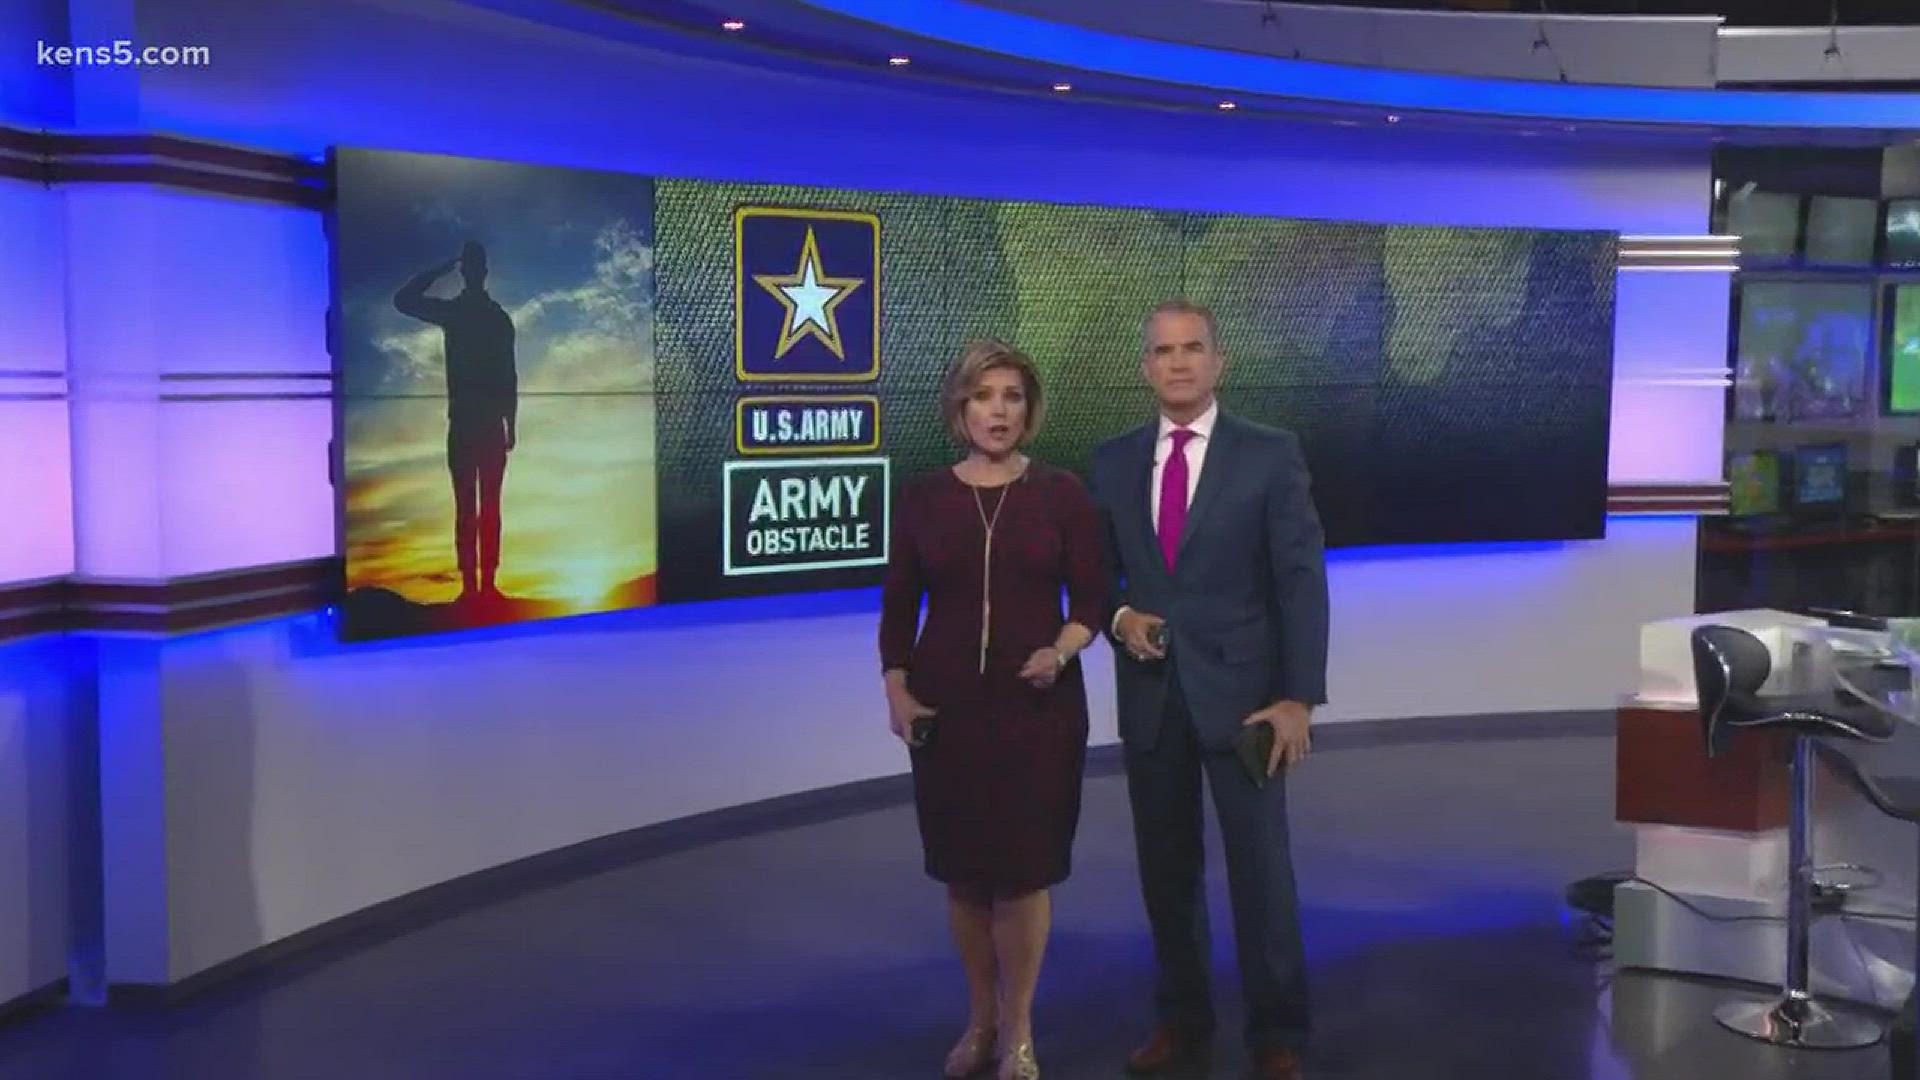 The problem with Army recruiting is that most candidates are out of shape or even obese, by Army standards. Eyewitness news reporter Luke Simons explains the obstacles and opportunities of Army life.